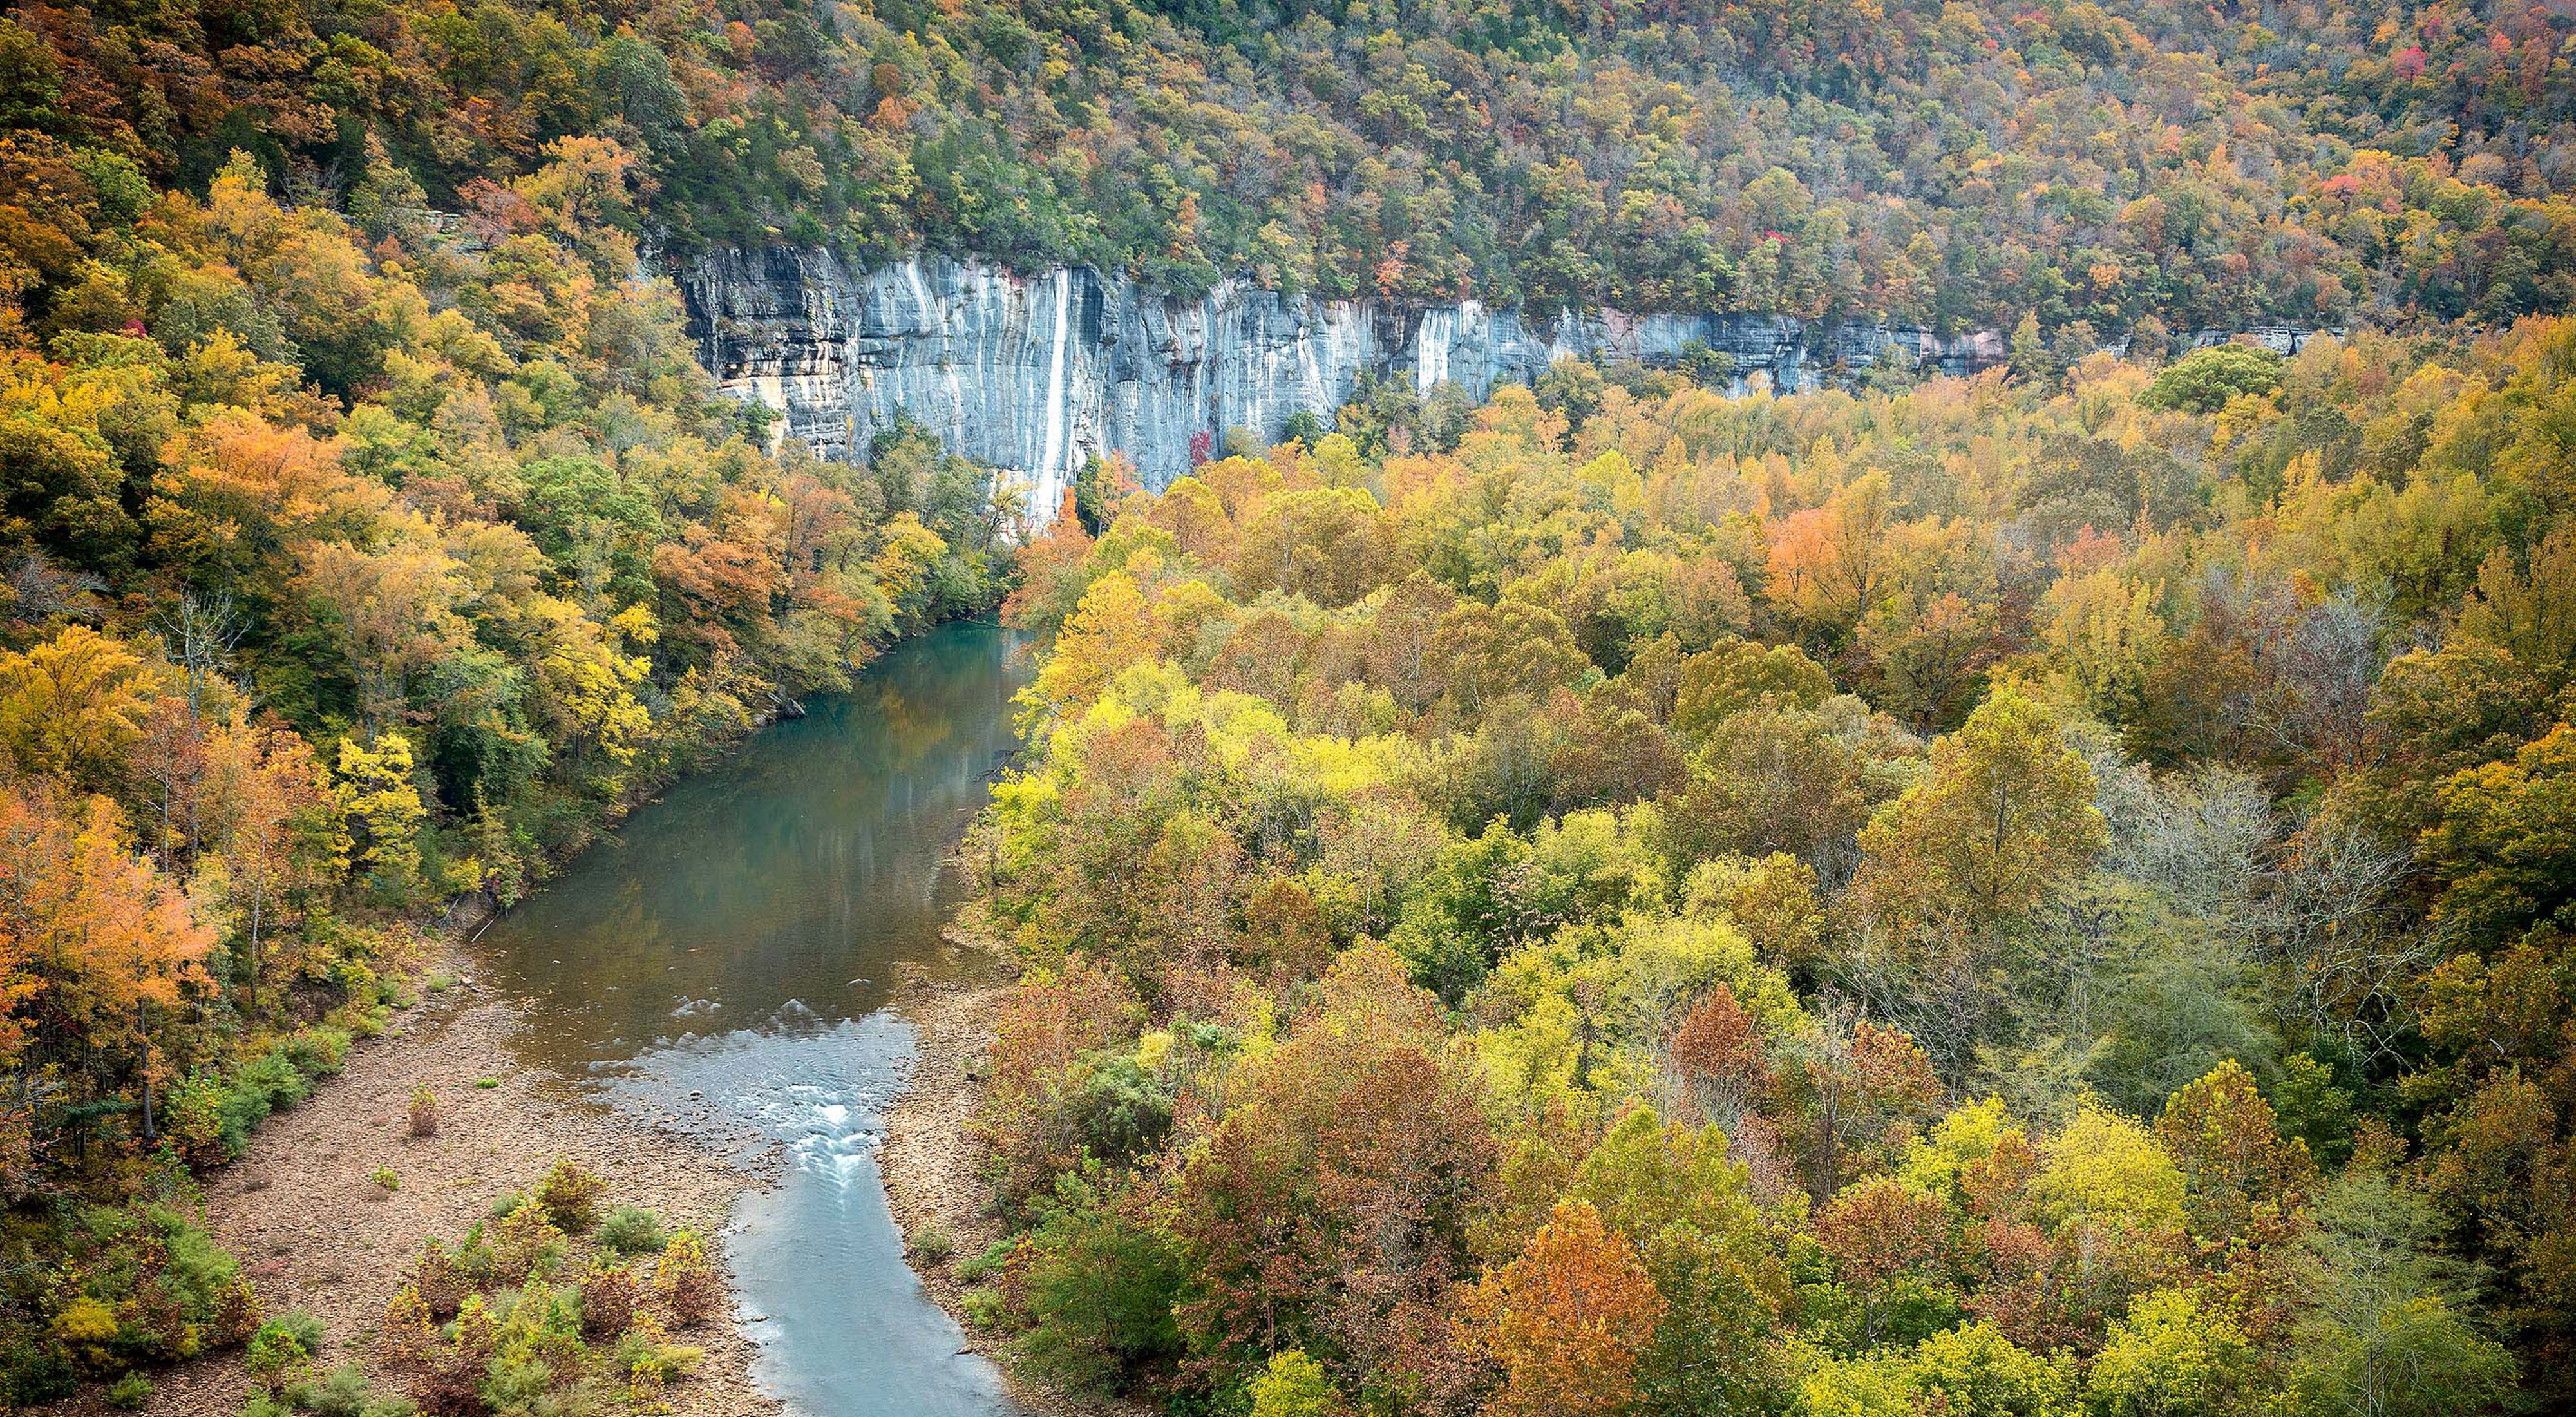 The scenic Buffalo National River flows past towering, rocky bluffs.